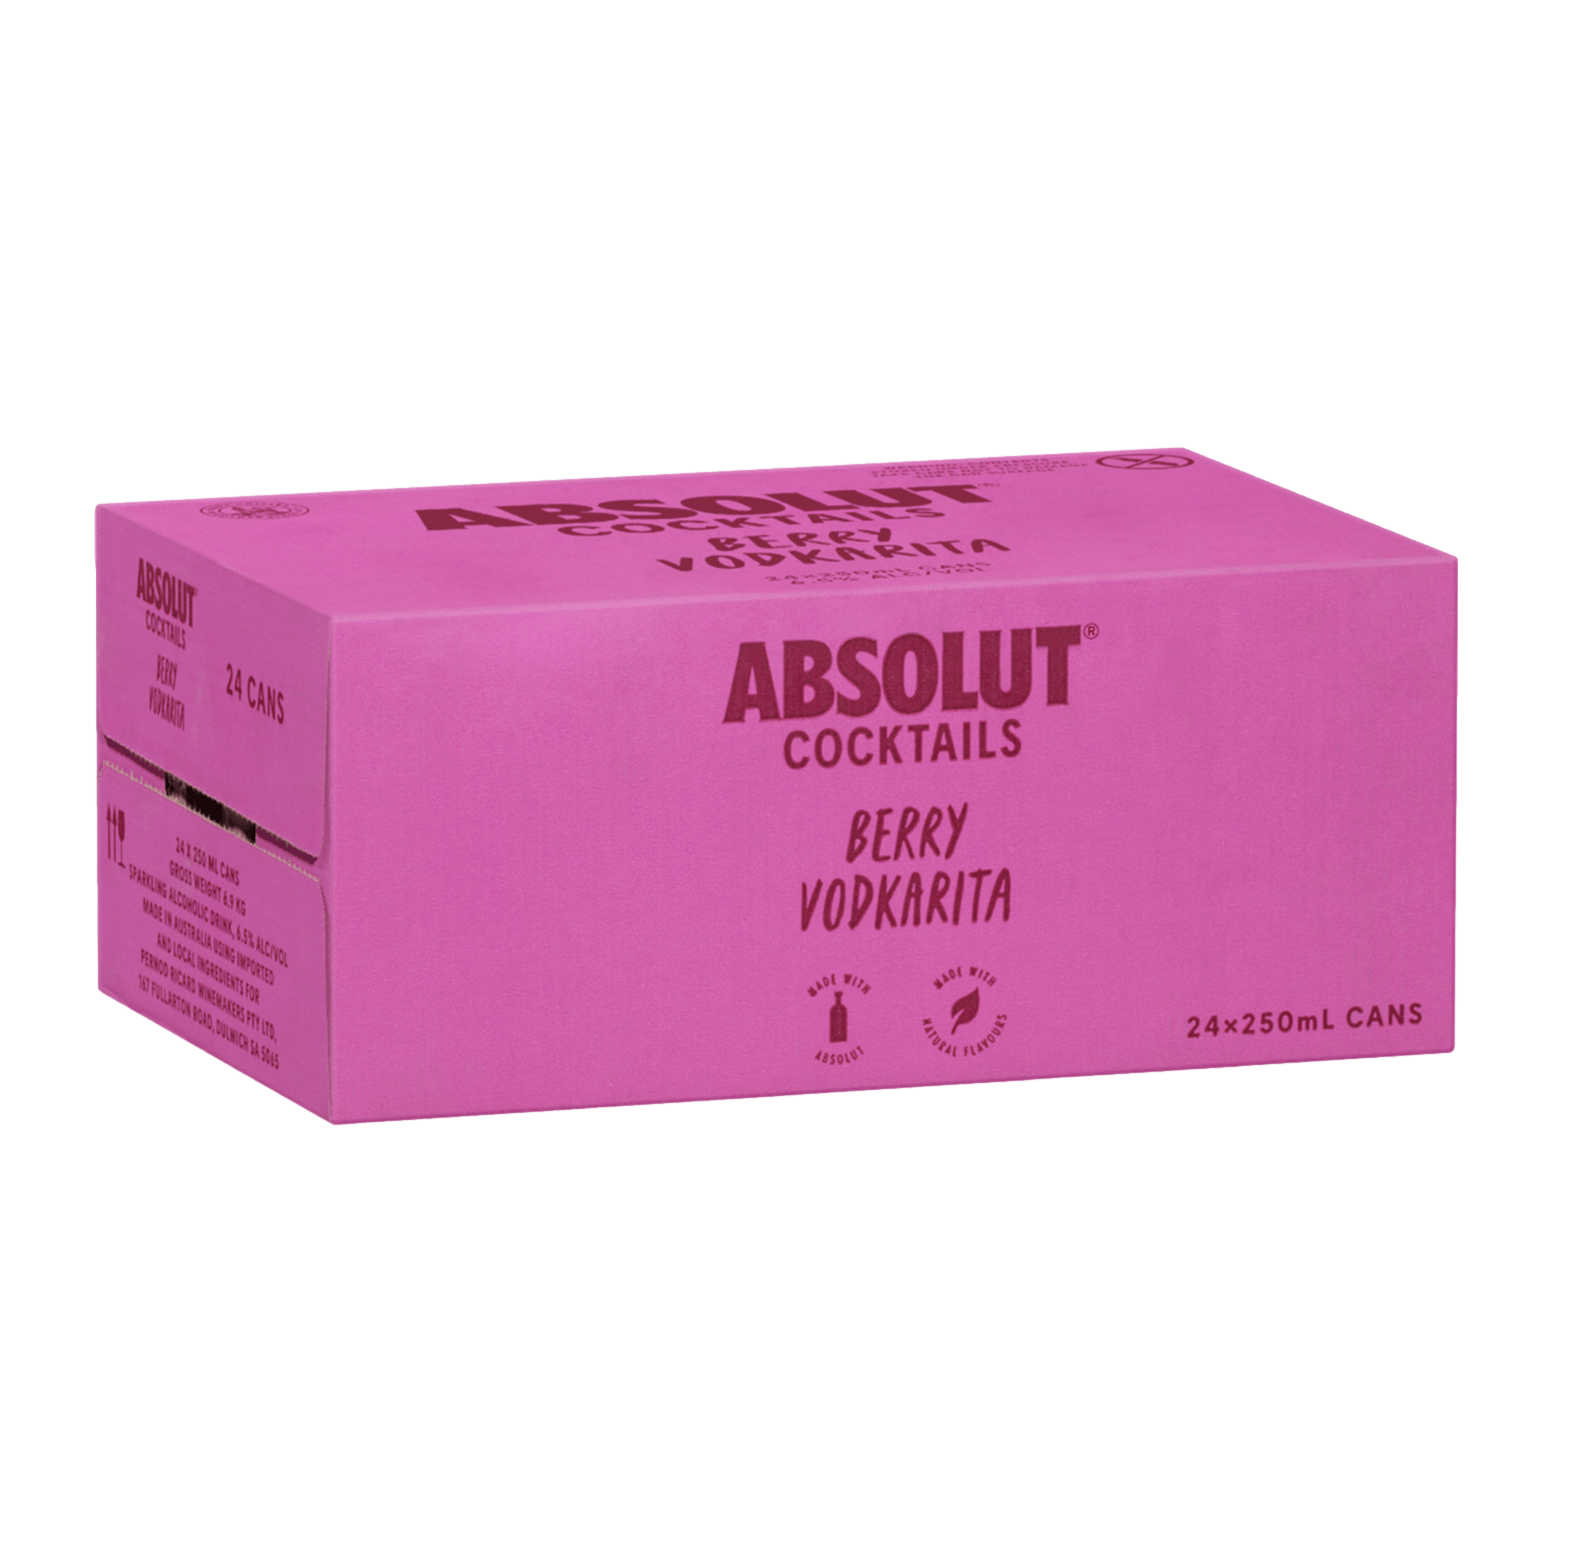 Absolut Cocktails Berry Vodkarita 6.5% 250ml Can Case of 24